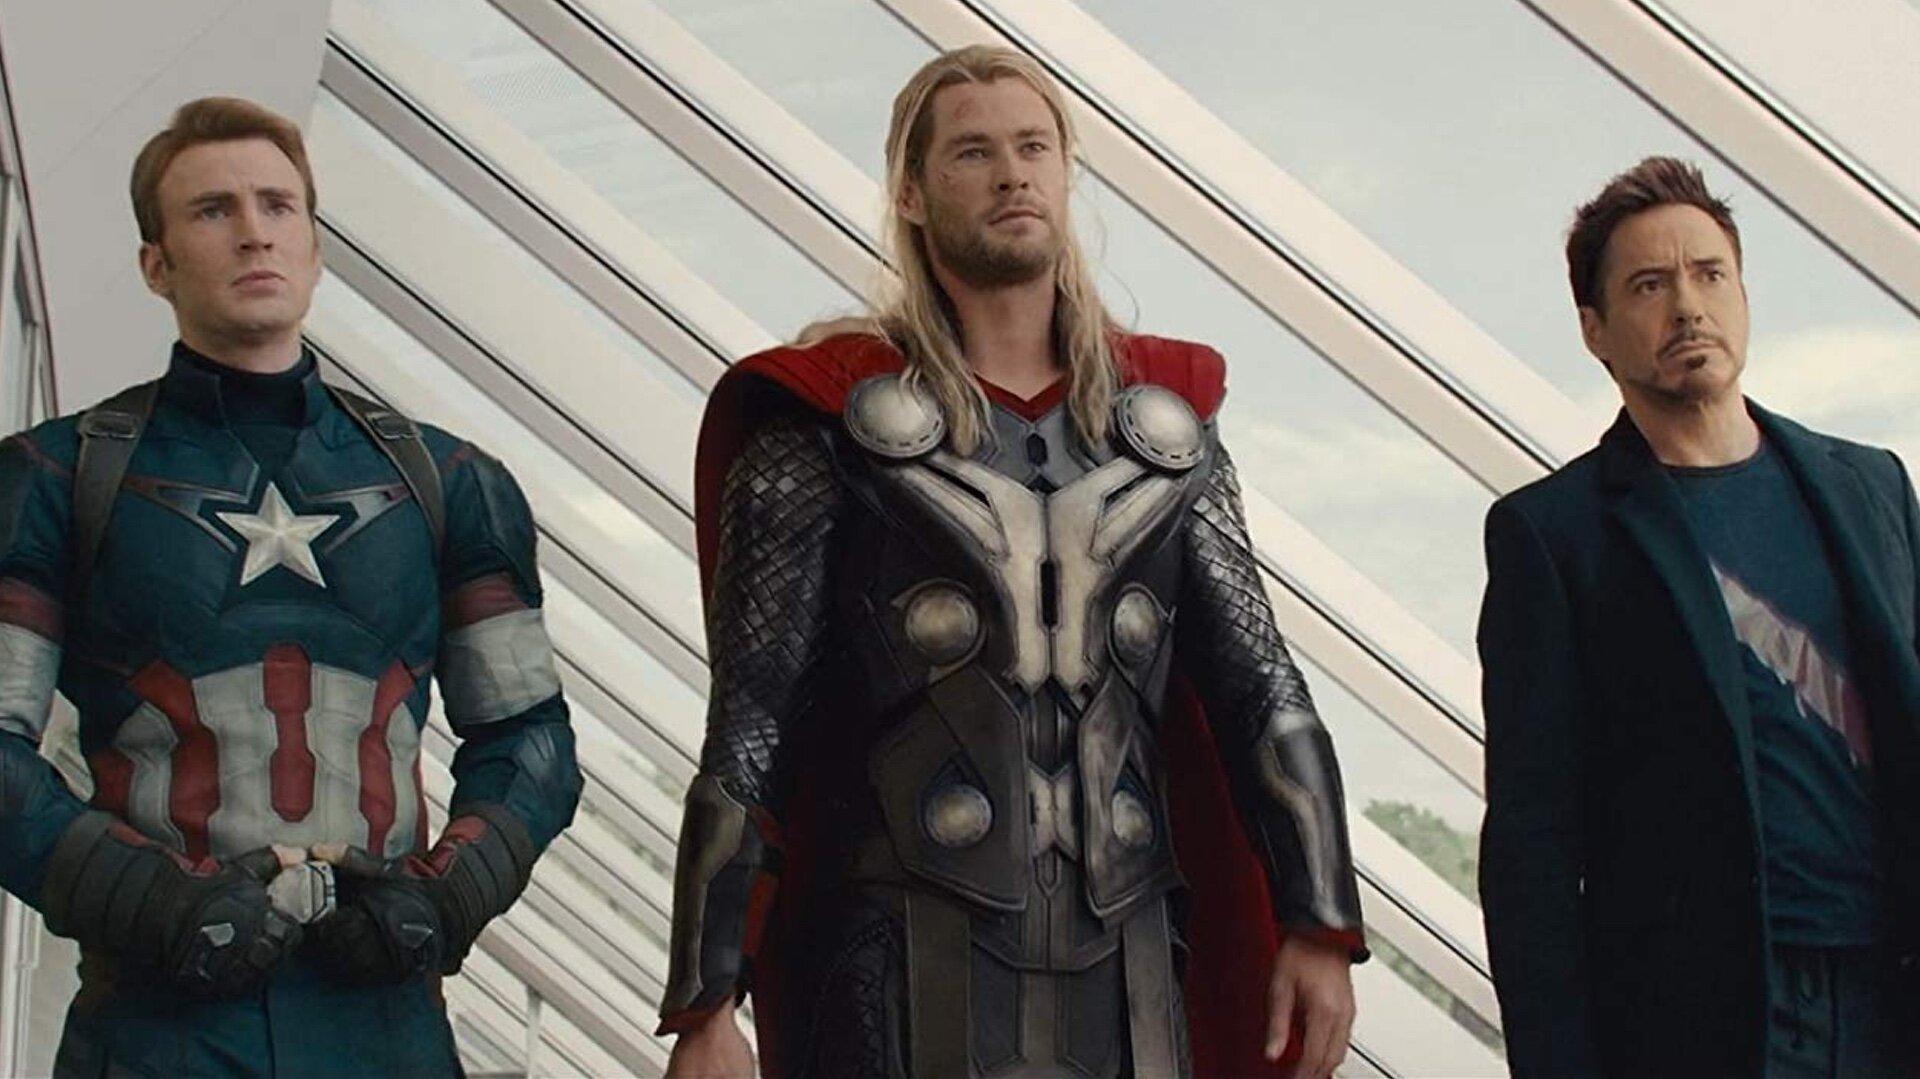 Chris Hemsworth Says He Wants To Remake Three Amigos With